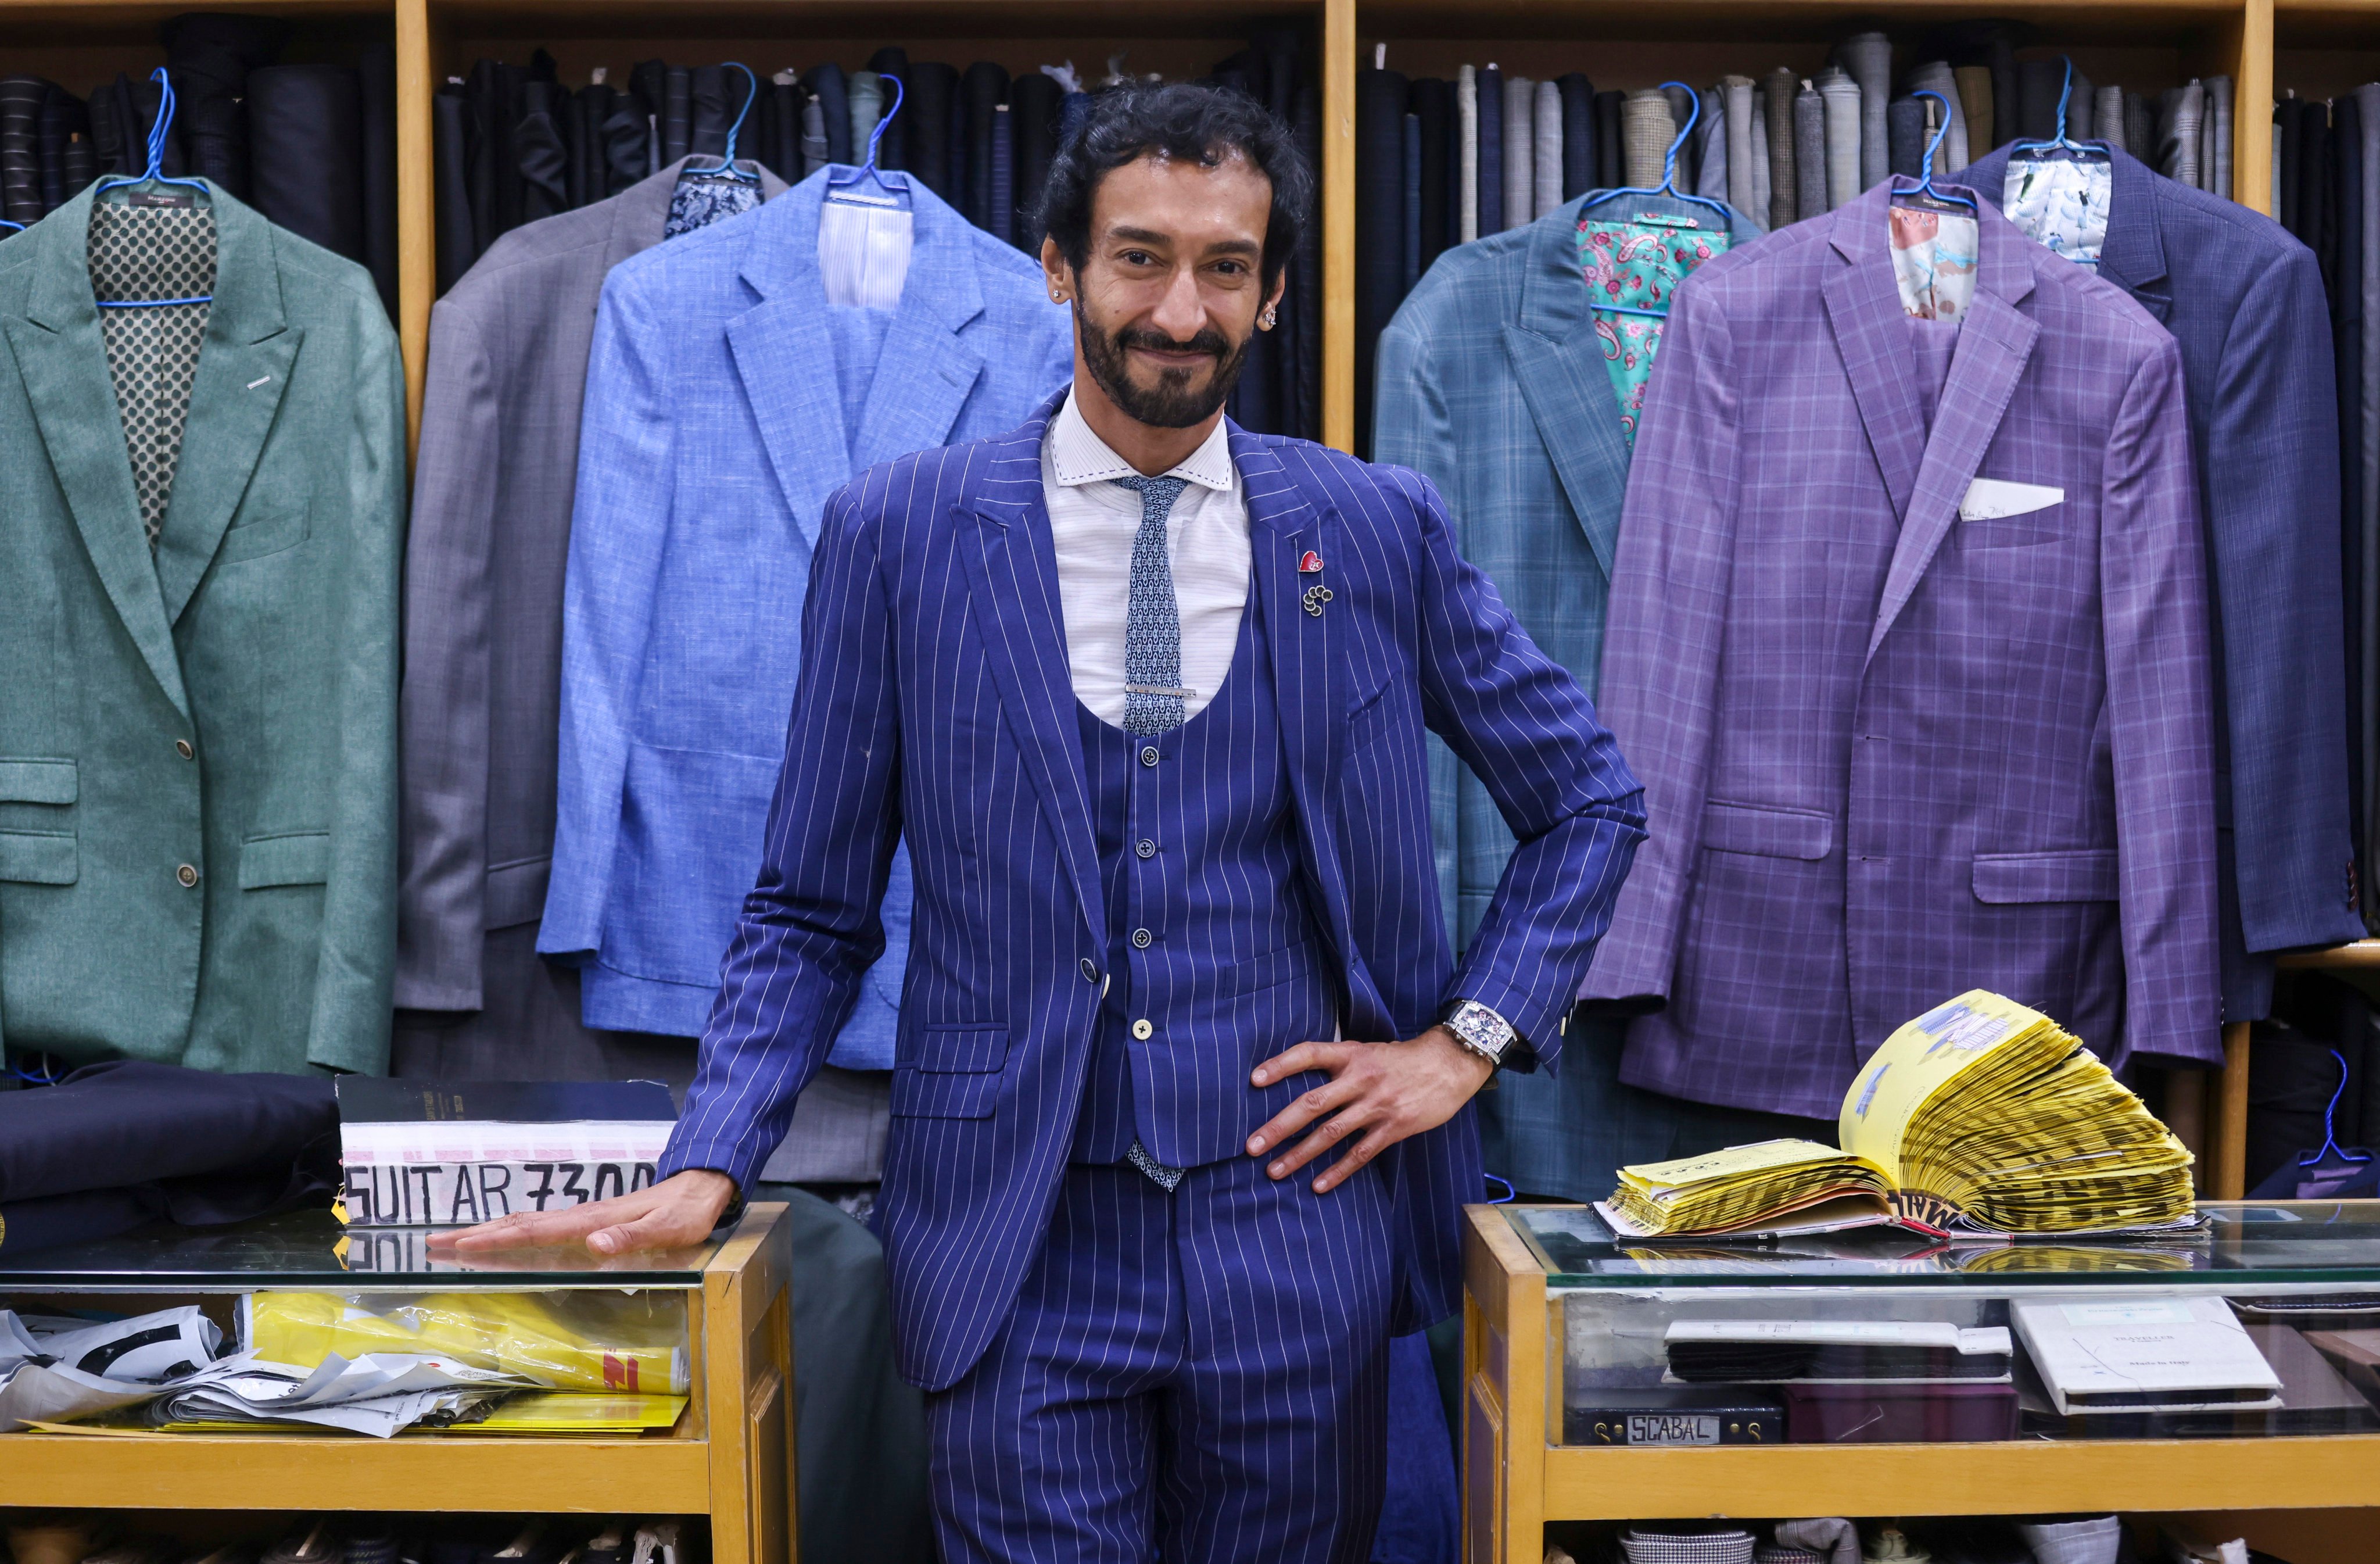 Roshan Melwani of Sam’s Tailor in Tsim Sha Tsui, Hong Kong, has made suits for  A-list celebrities and is now enjoying TikTok success with videos that share his love of suits with a young audience. Photo: Jonathan Wong